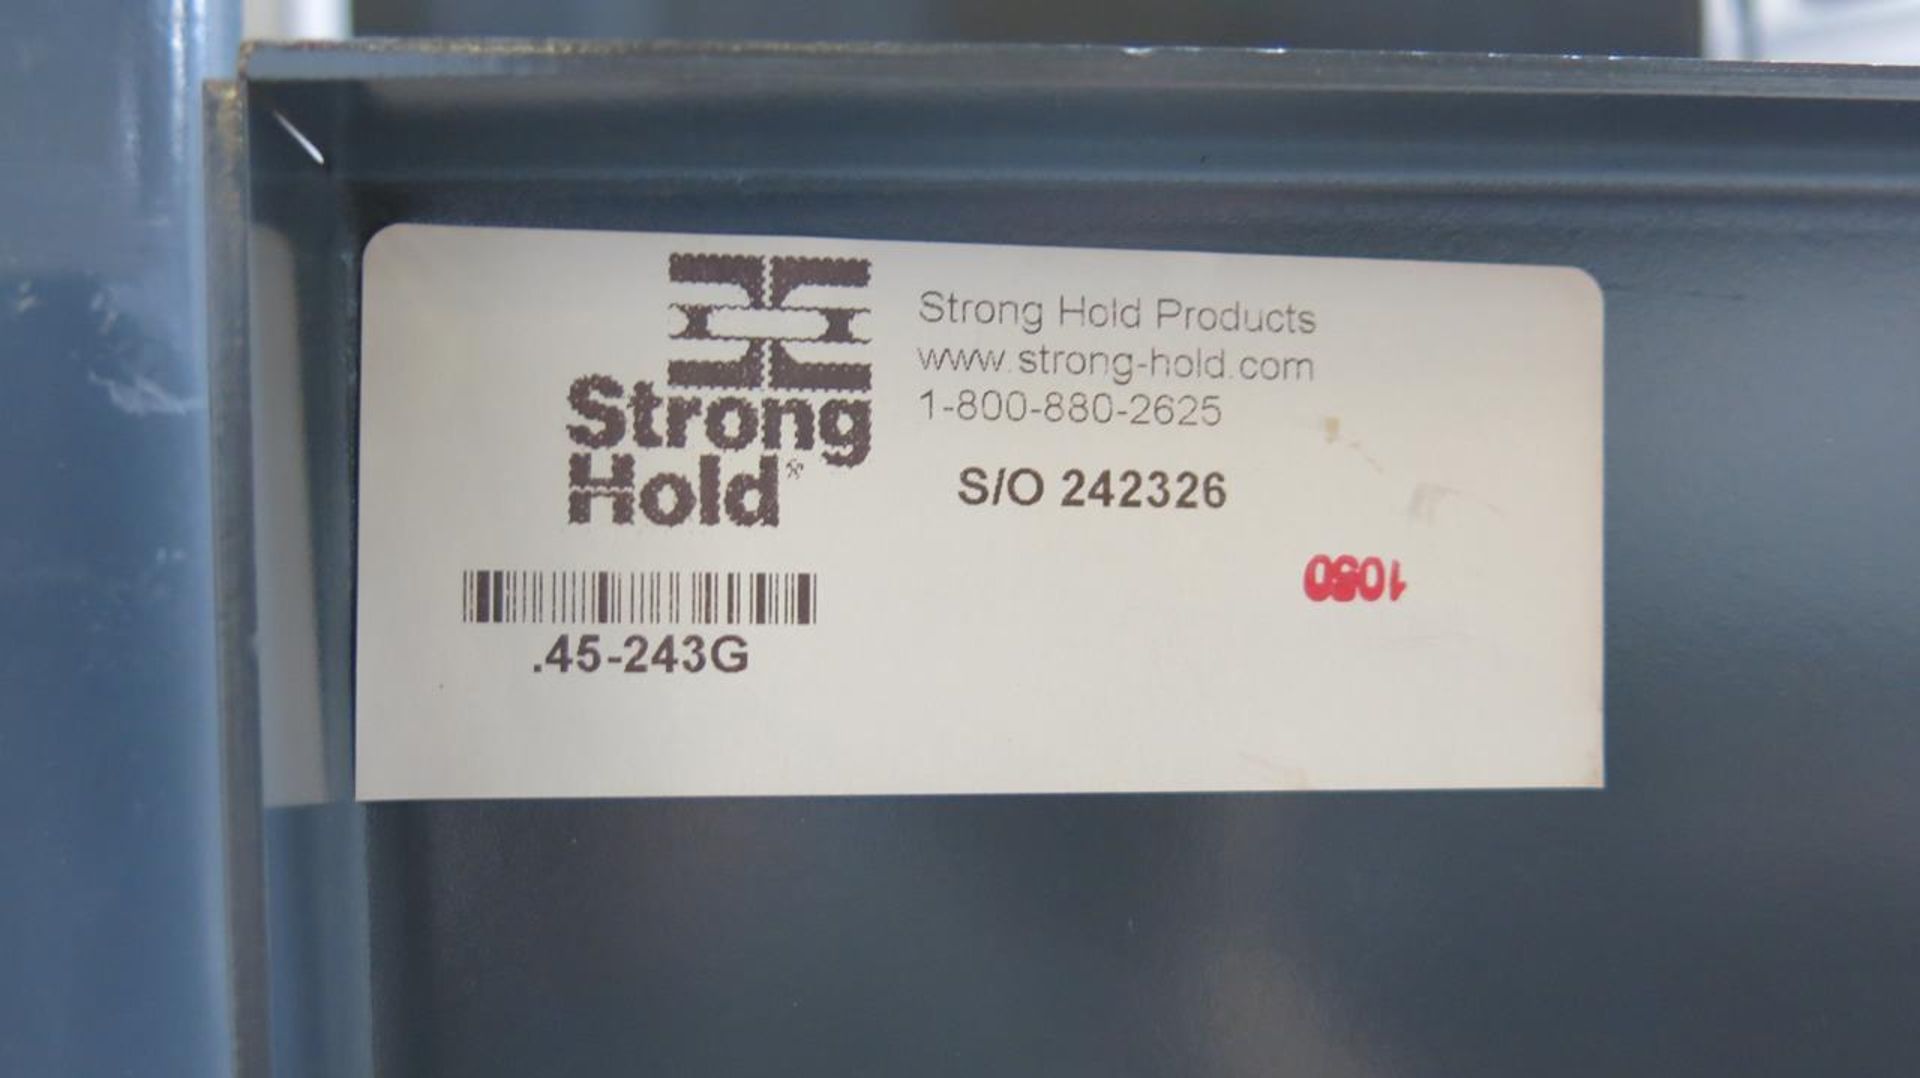 STRONG HOLD, HEAVY DUTY, STEEL, TWO-DOOR, STORAGE CABINET, 5' X 4' X 2.5' - Image 4 of 4